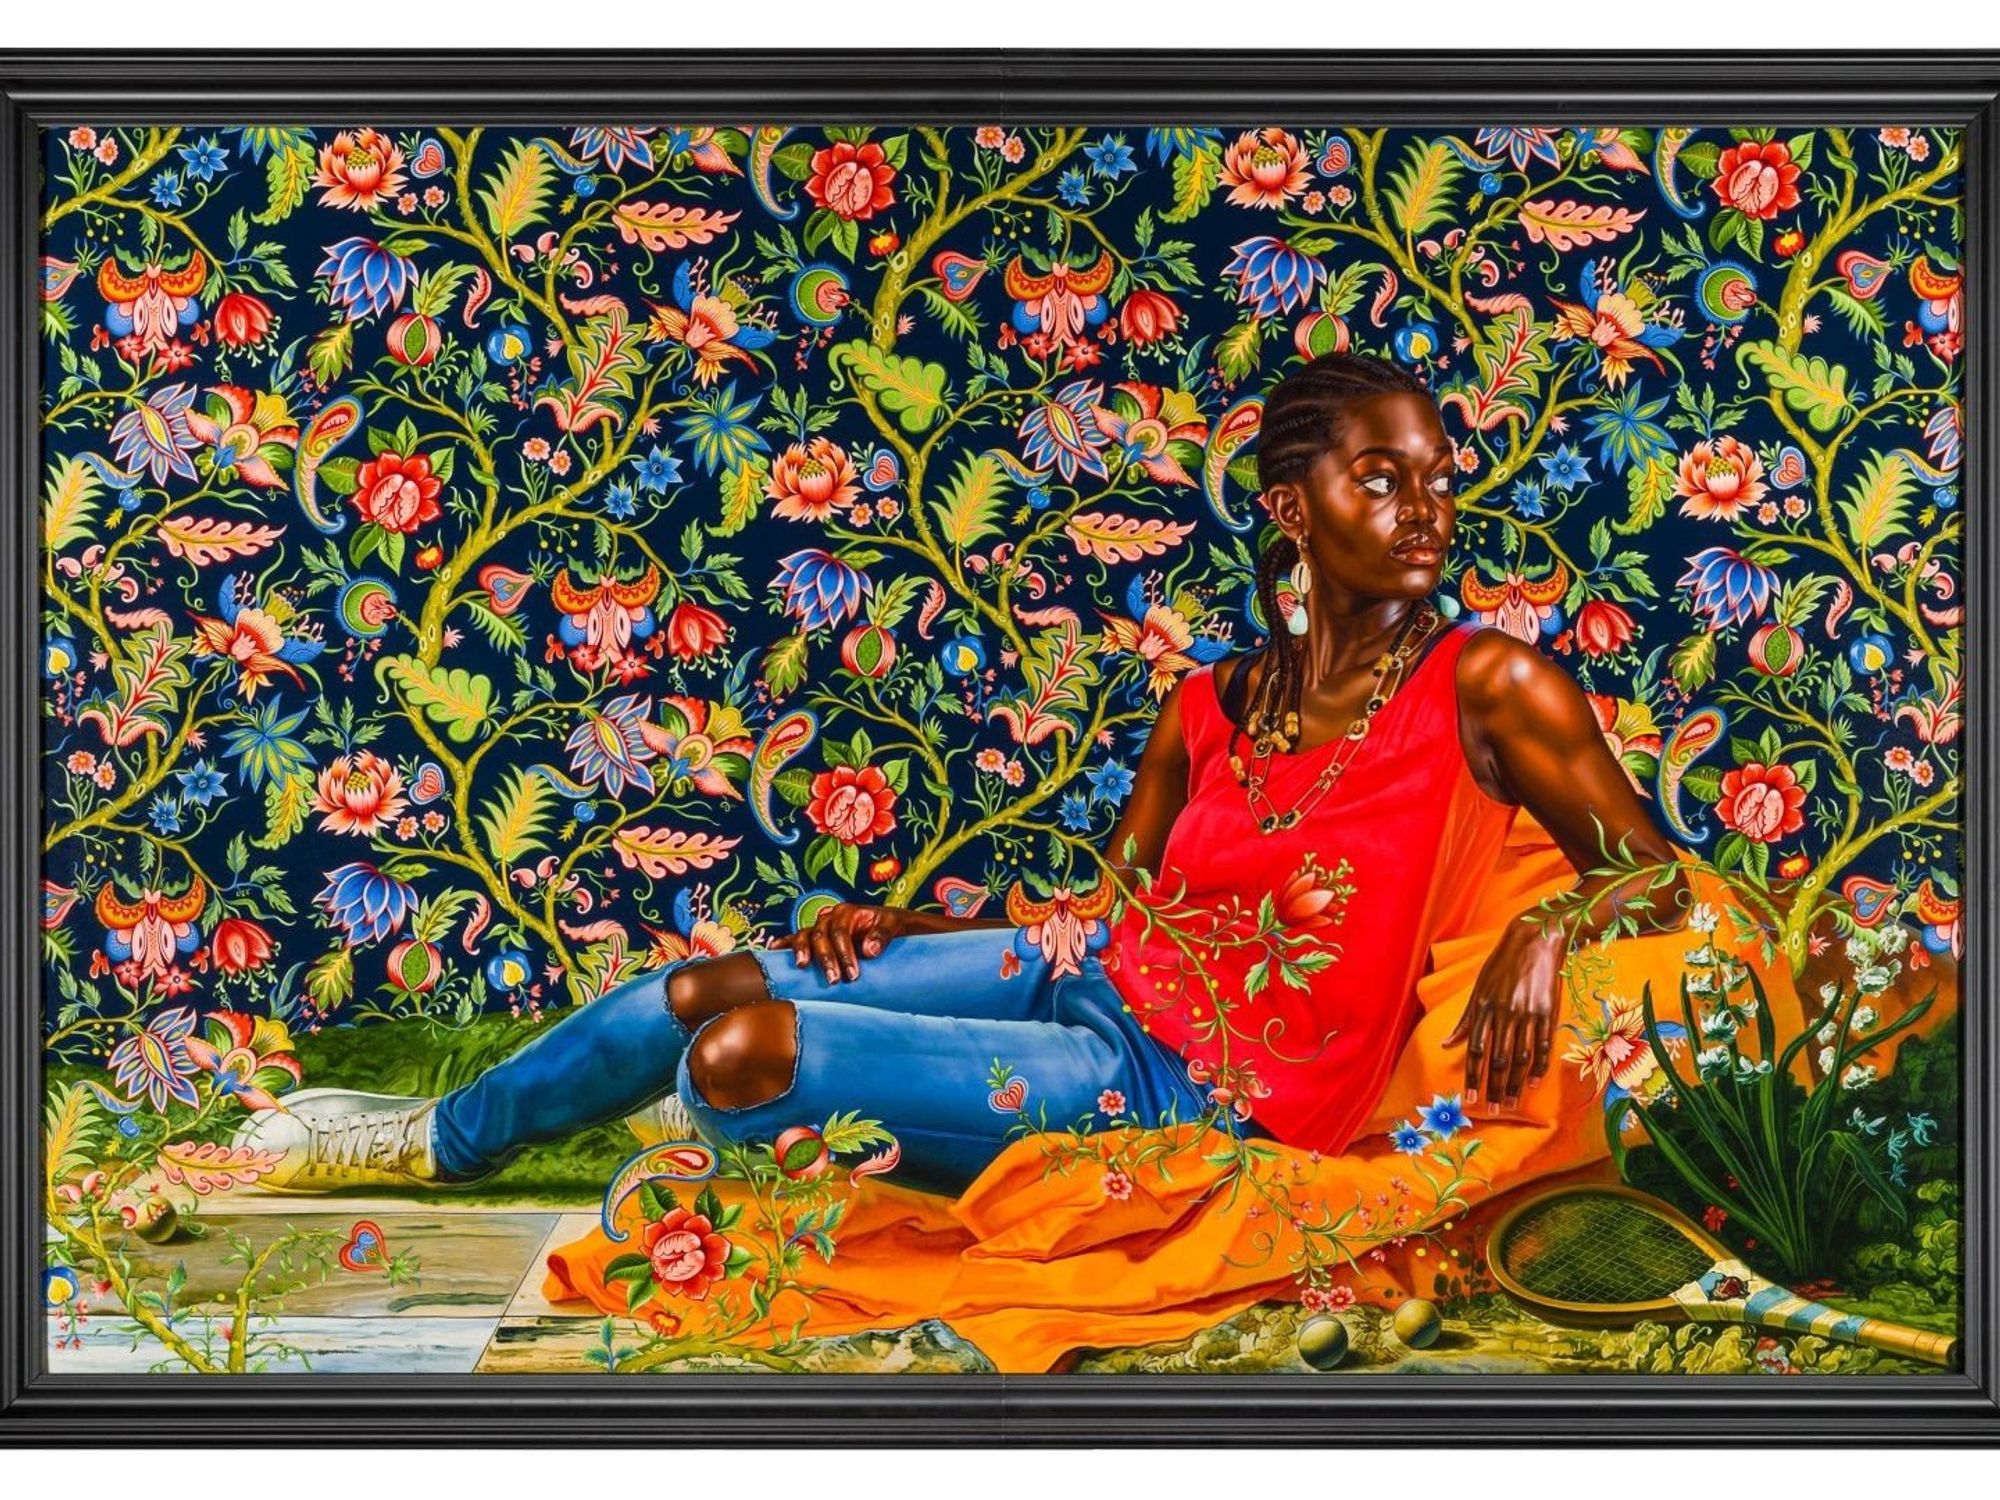 The Museum of Fine Arts, Houston presents "Kehinde Wiley: An Archaeology of Silence"